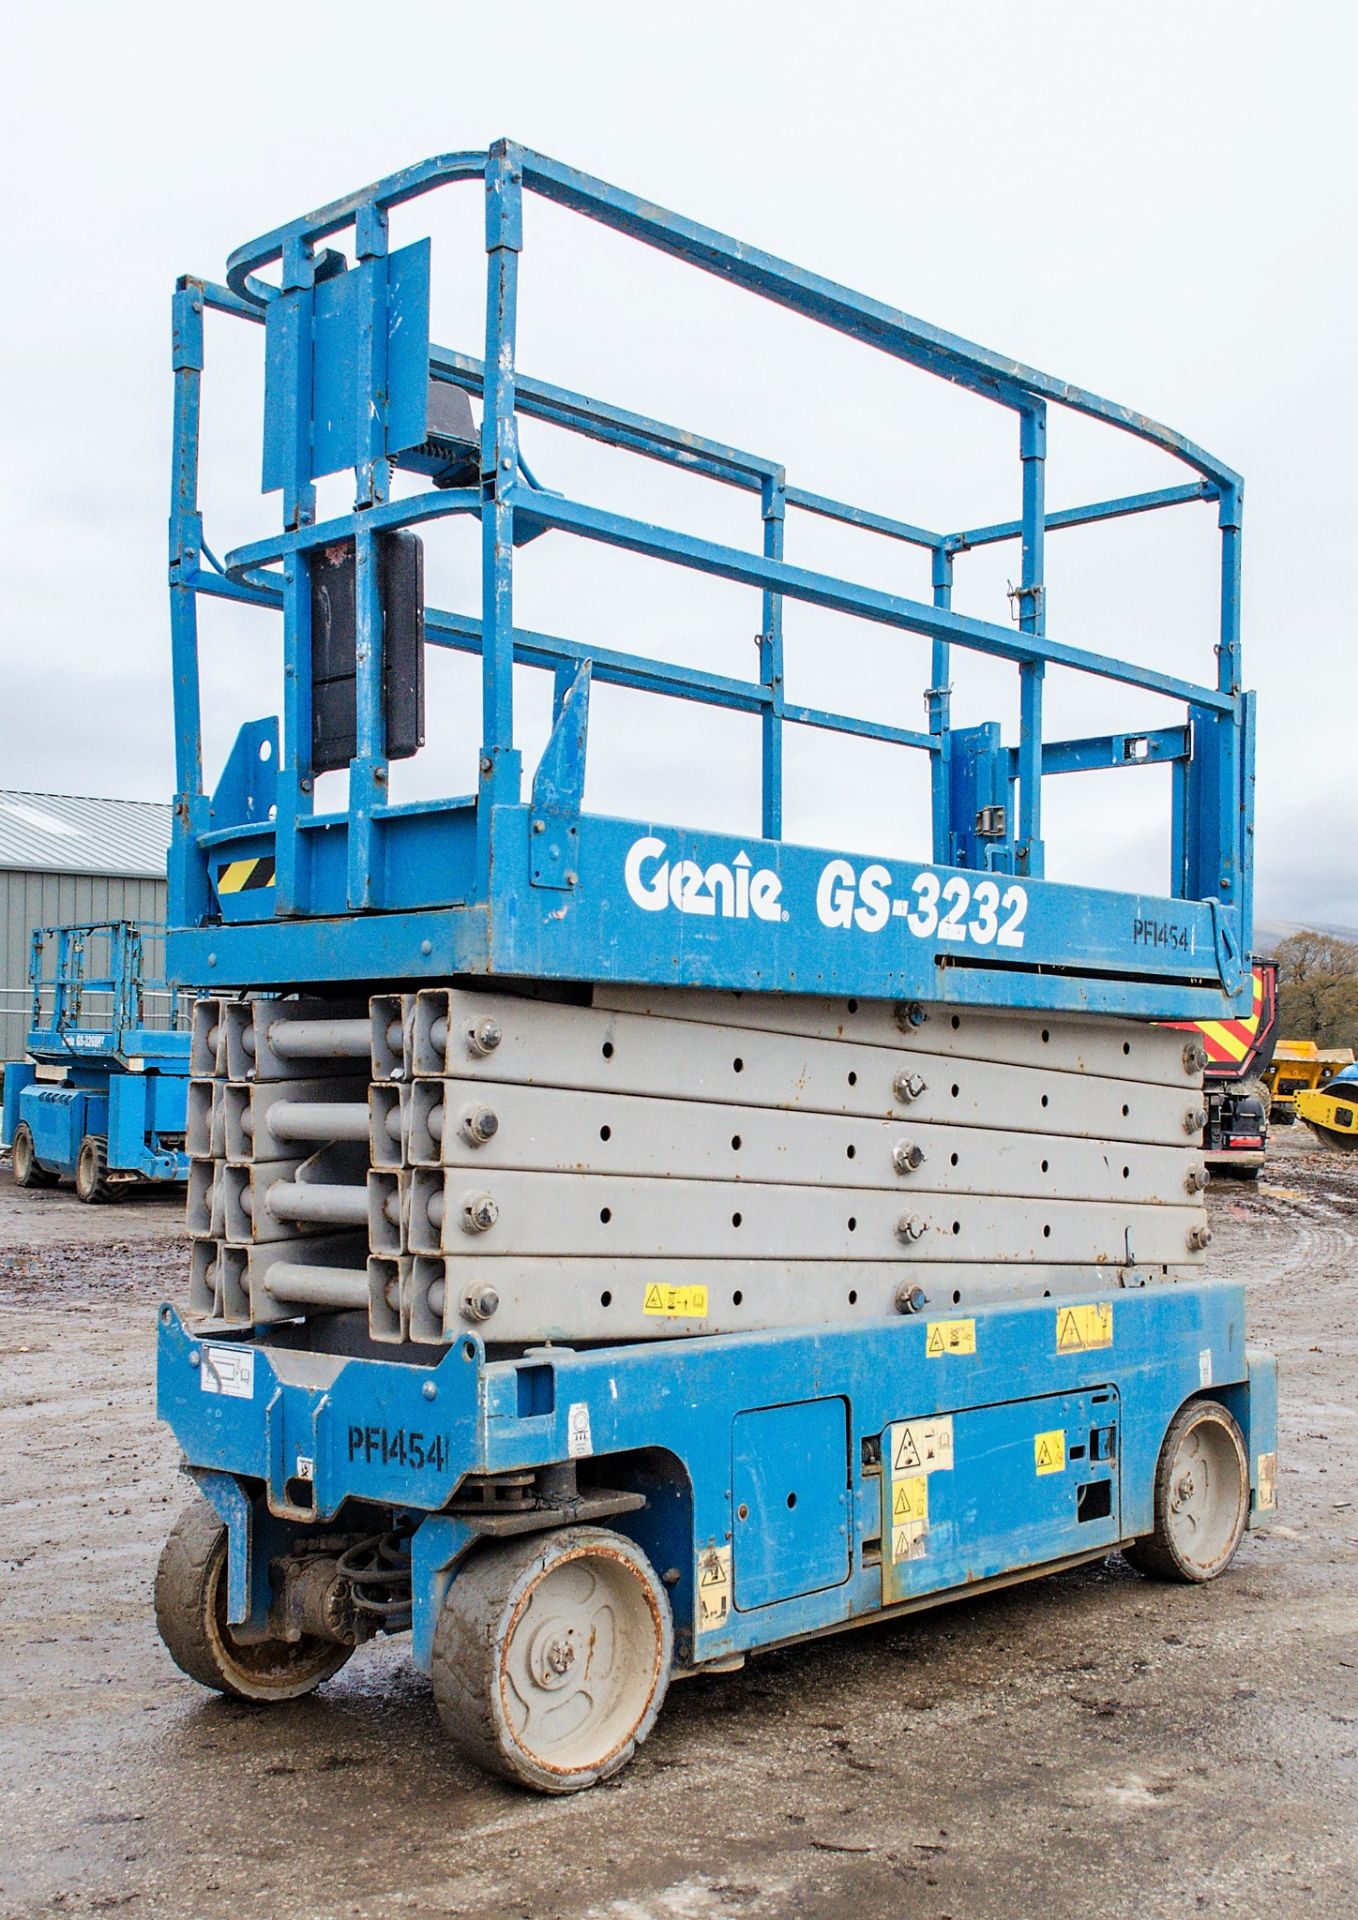 Genie GS3232 battery electric scissor lift access platform Year: 2007 S/N: 88244 Recorded Hours: 411